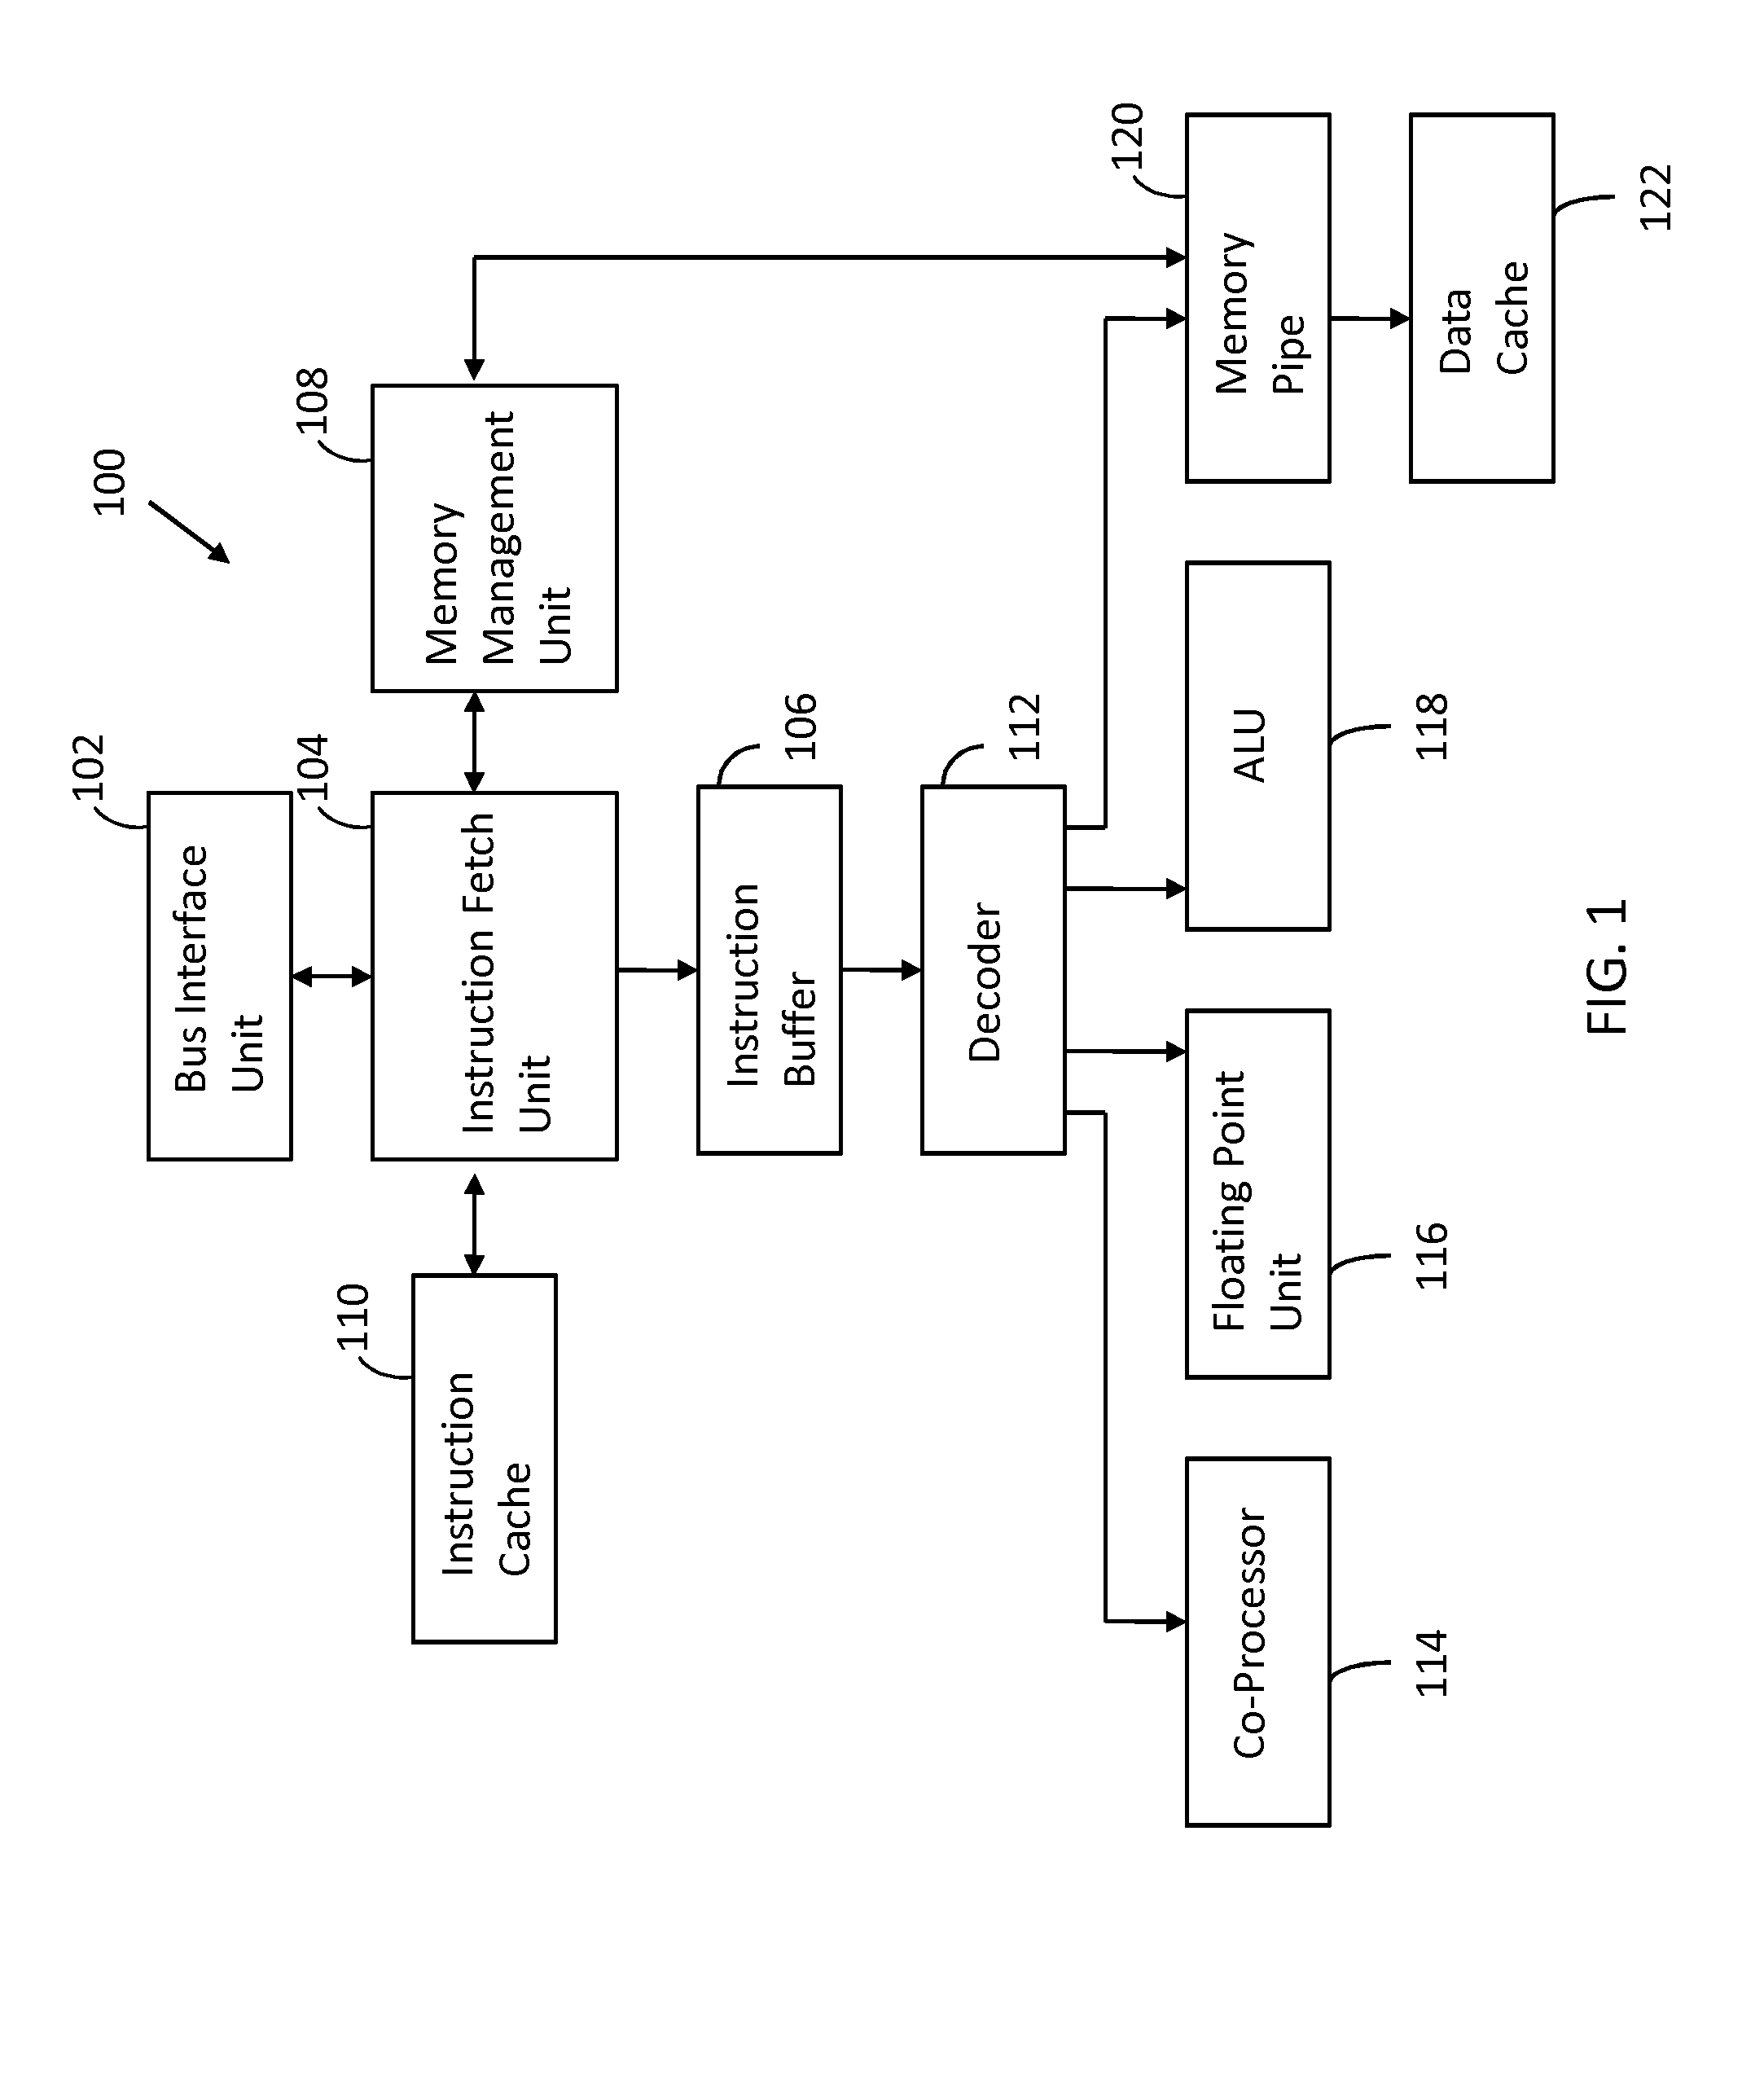 Apparatus and Method for Branch Instruction Bonding